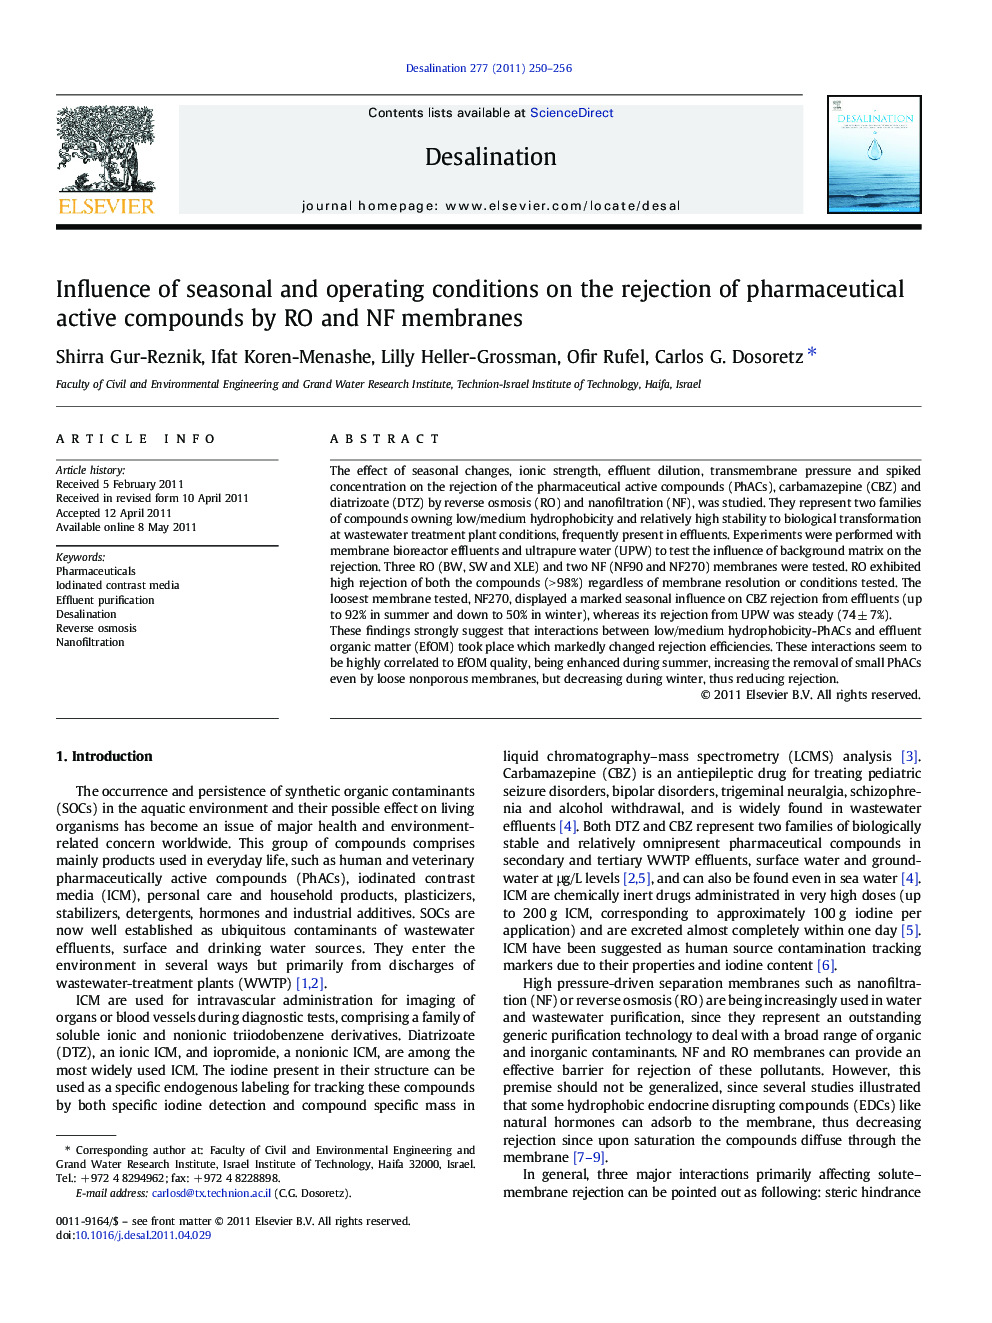 Influence of seasonal and operating conditions on the rejection of pharmaceutical active compounds by RO and NF membranes